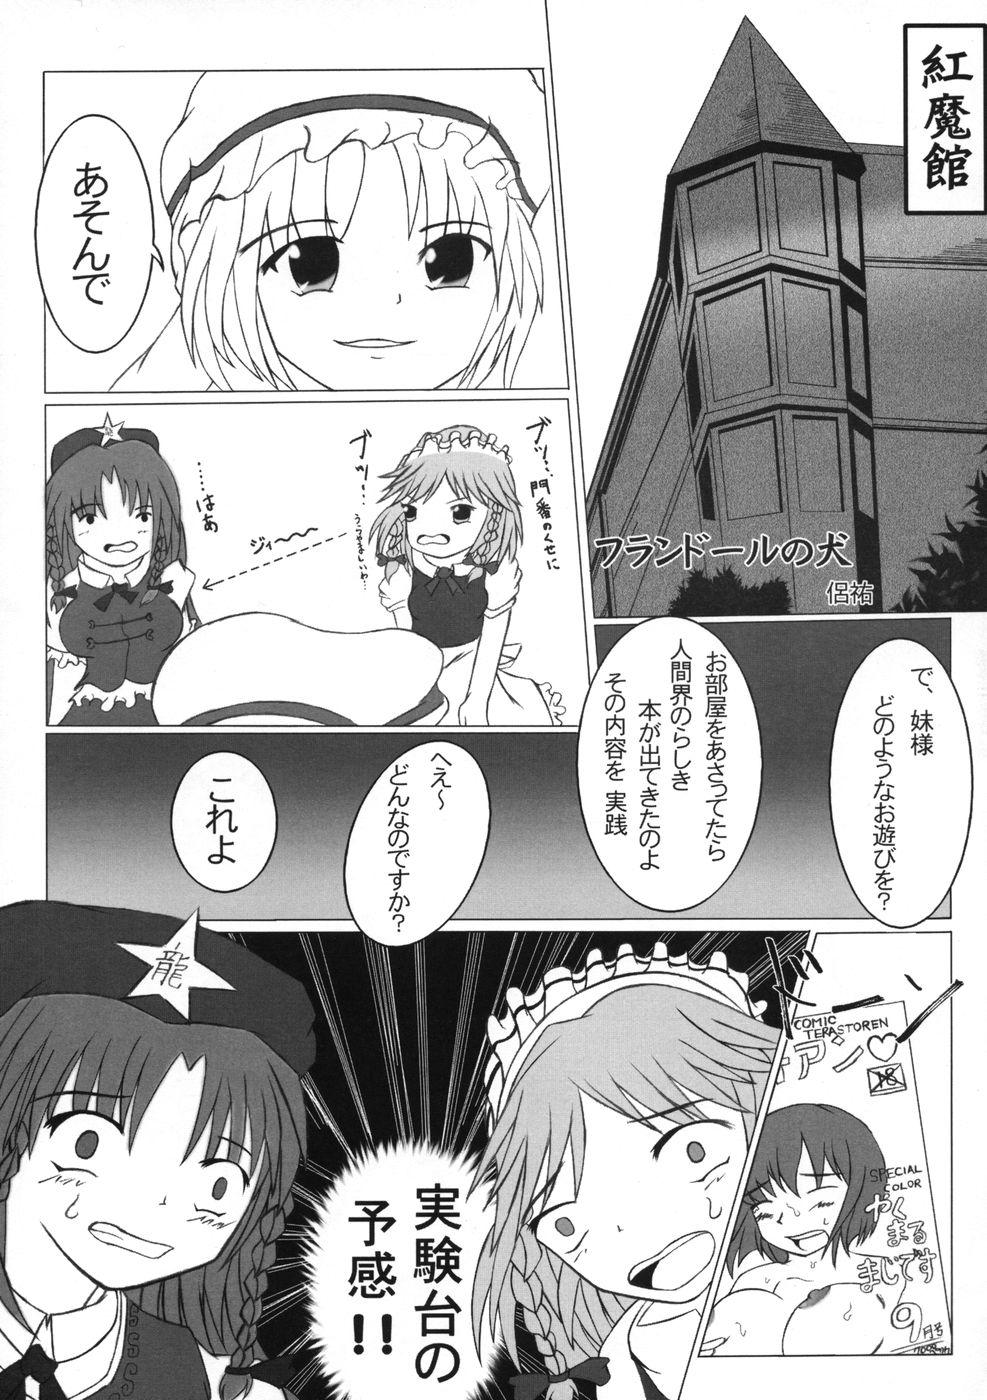 Blow Job 業創りし風 - Touhou project Point Of View - Page 5